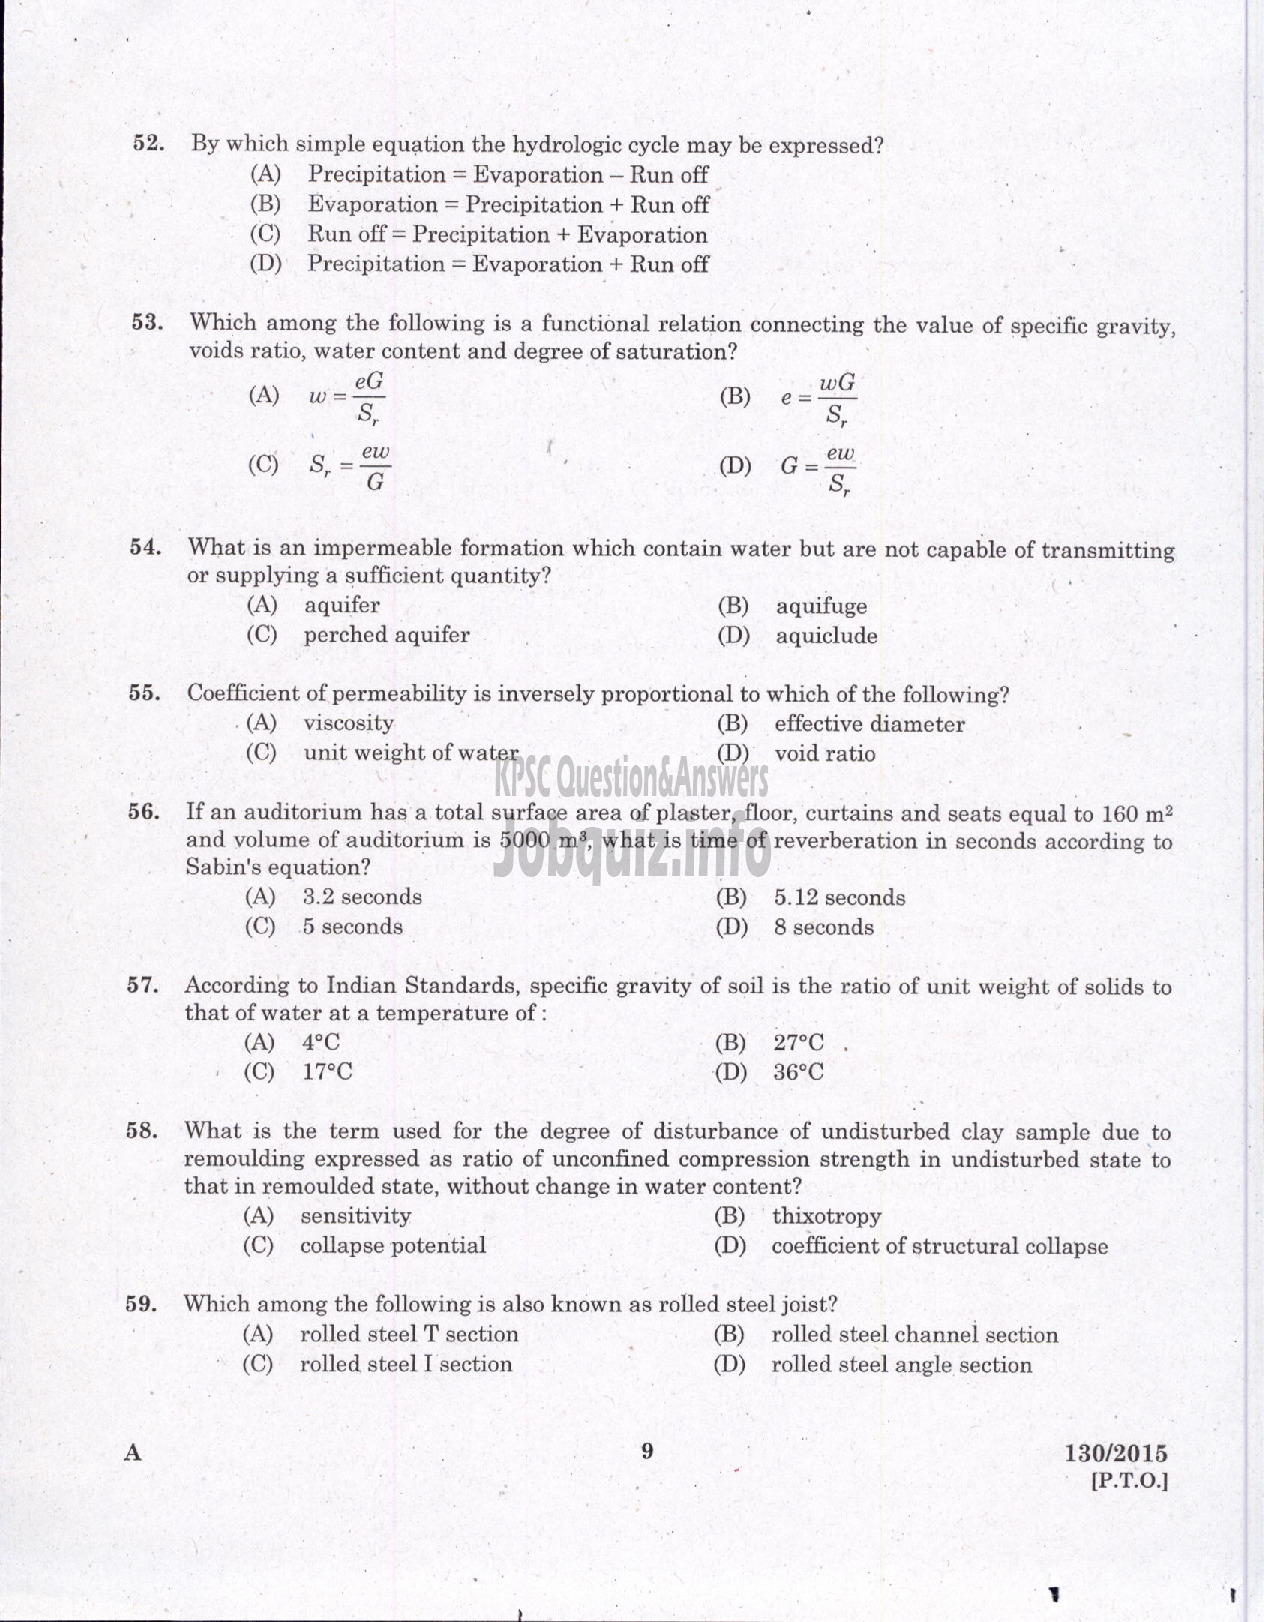 Kerala PSC Question Paper - ASSISTANT ENGINEER CIVIL LOCAL SELF GOVERNMENT/PWD/IRRIGATION-7